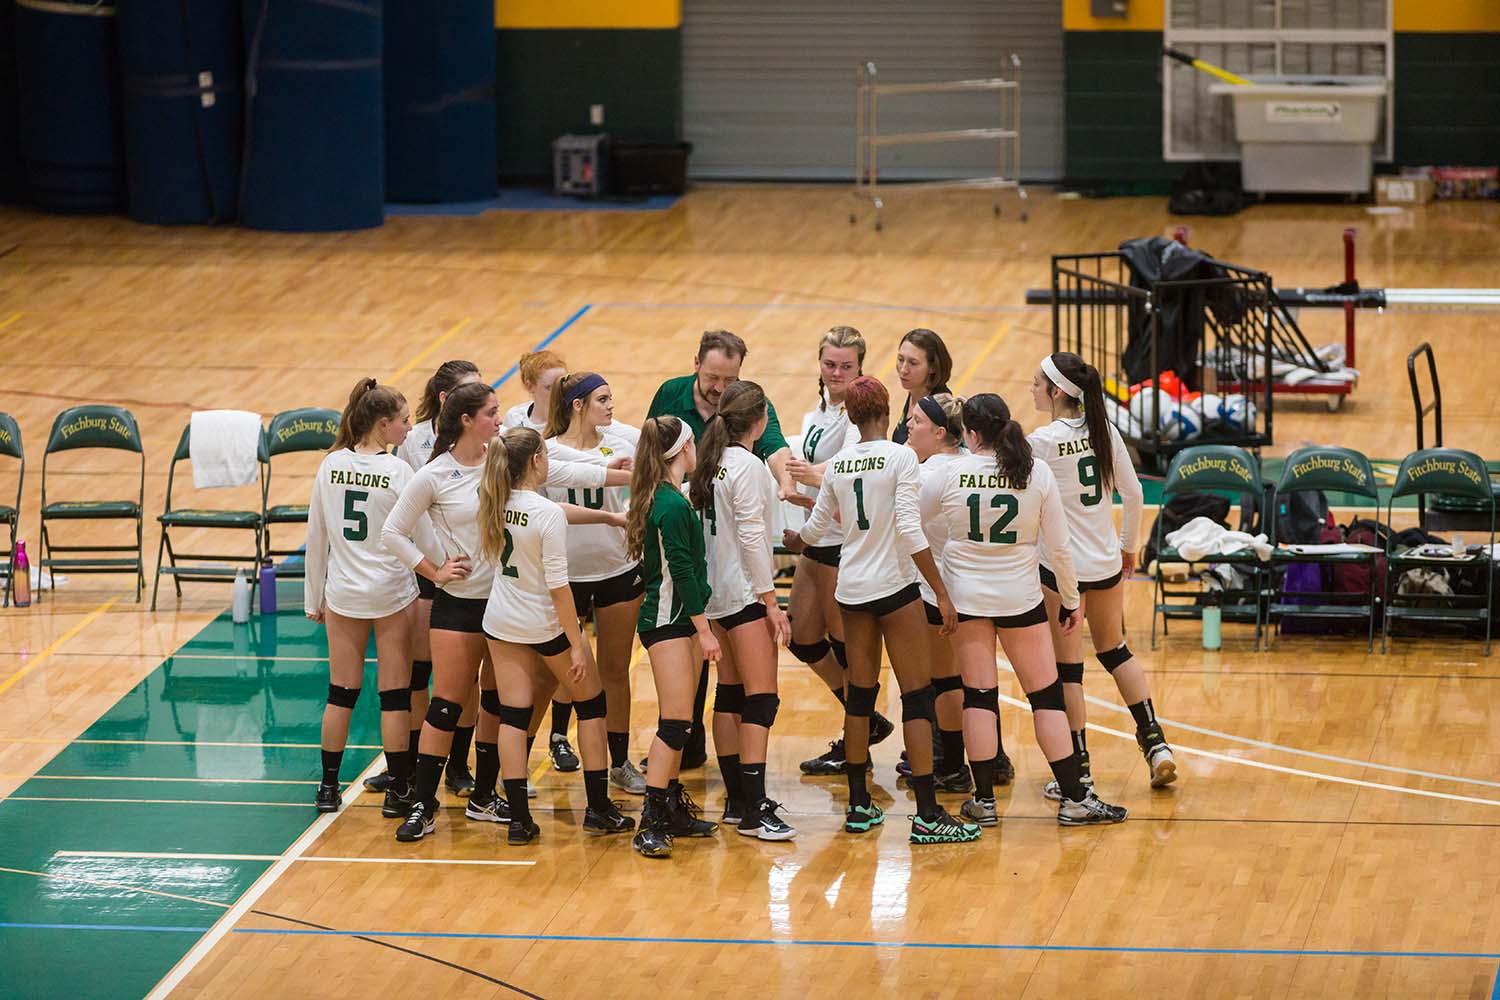  Rams Roll Past Falcons in Volleyball, 3-0